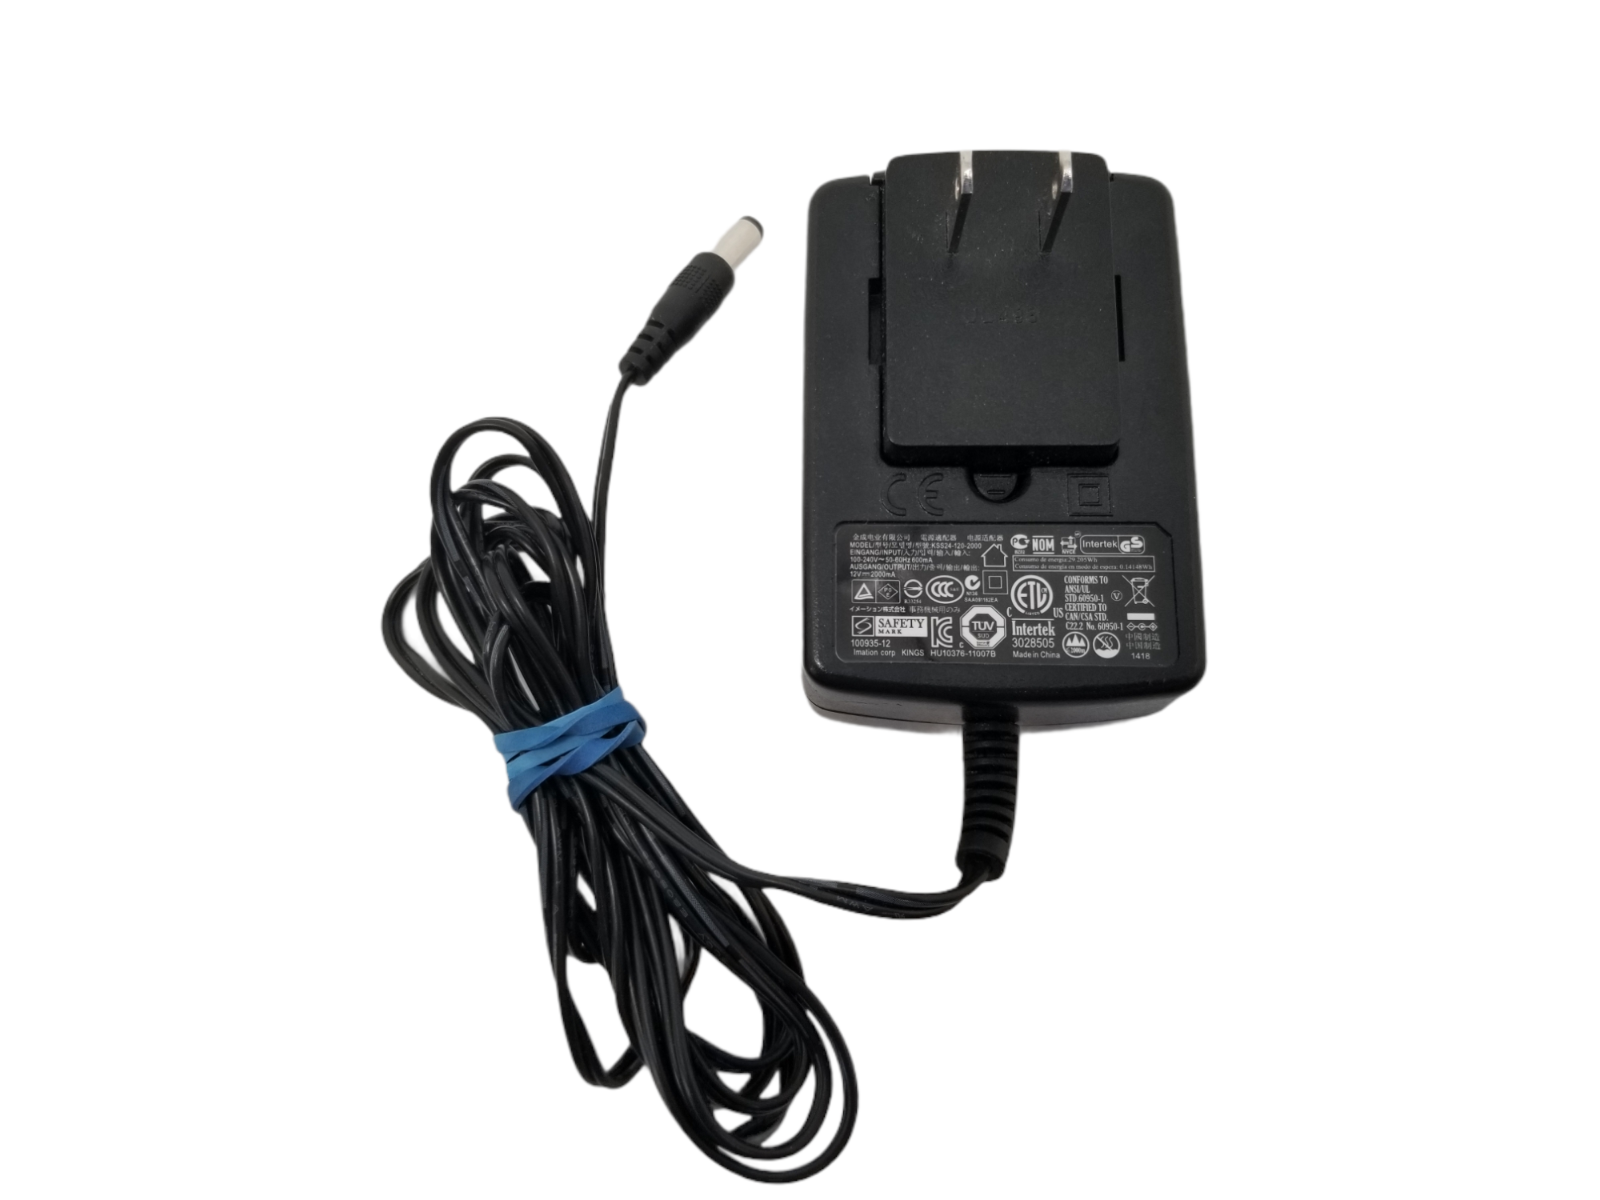 OEM AC/DC Adapter Cord For Intertek Kings KSS24-120-2000 Power Supply Charger Type: AC/DC Adapter Compatible Model: - Click Image to Close